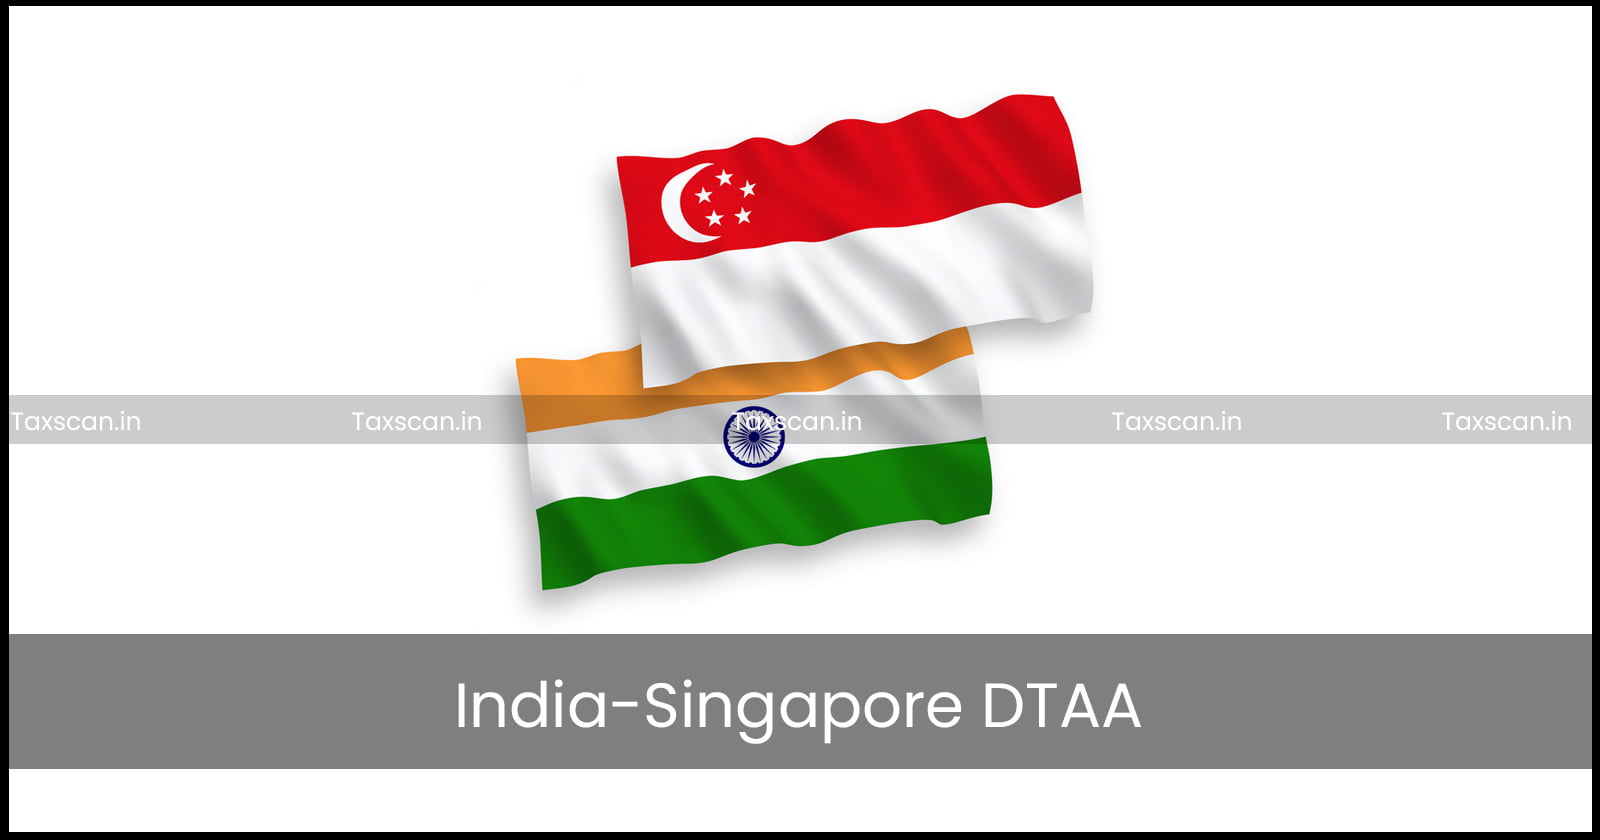 Management Support Services - Management Support Services provided to various Hotels in India - FTS - India-Singapore DTAA - DTAA - ITAT deletes Addition - ITAT - Addition - Taxscan